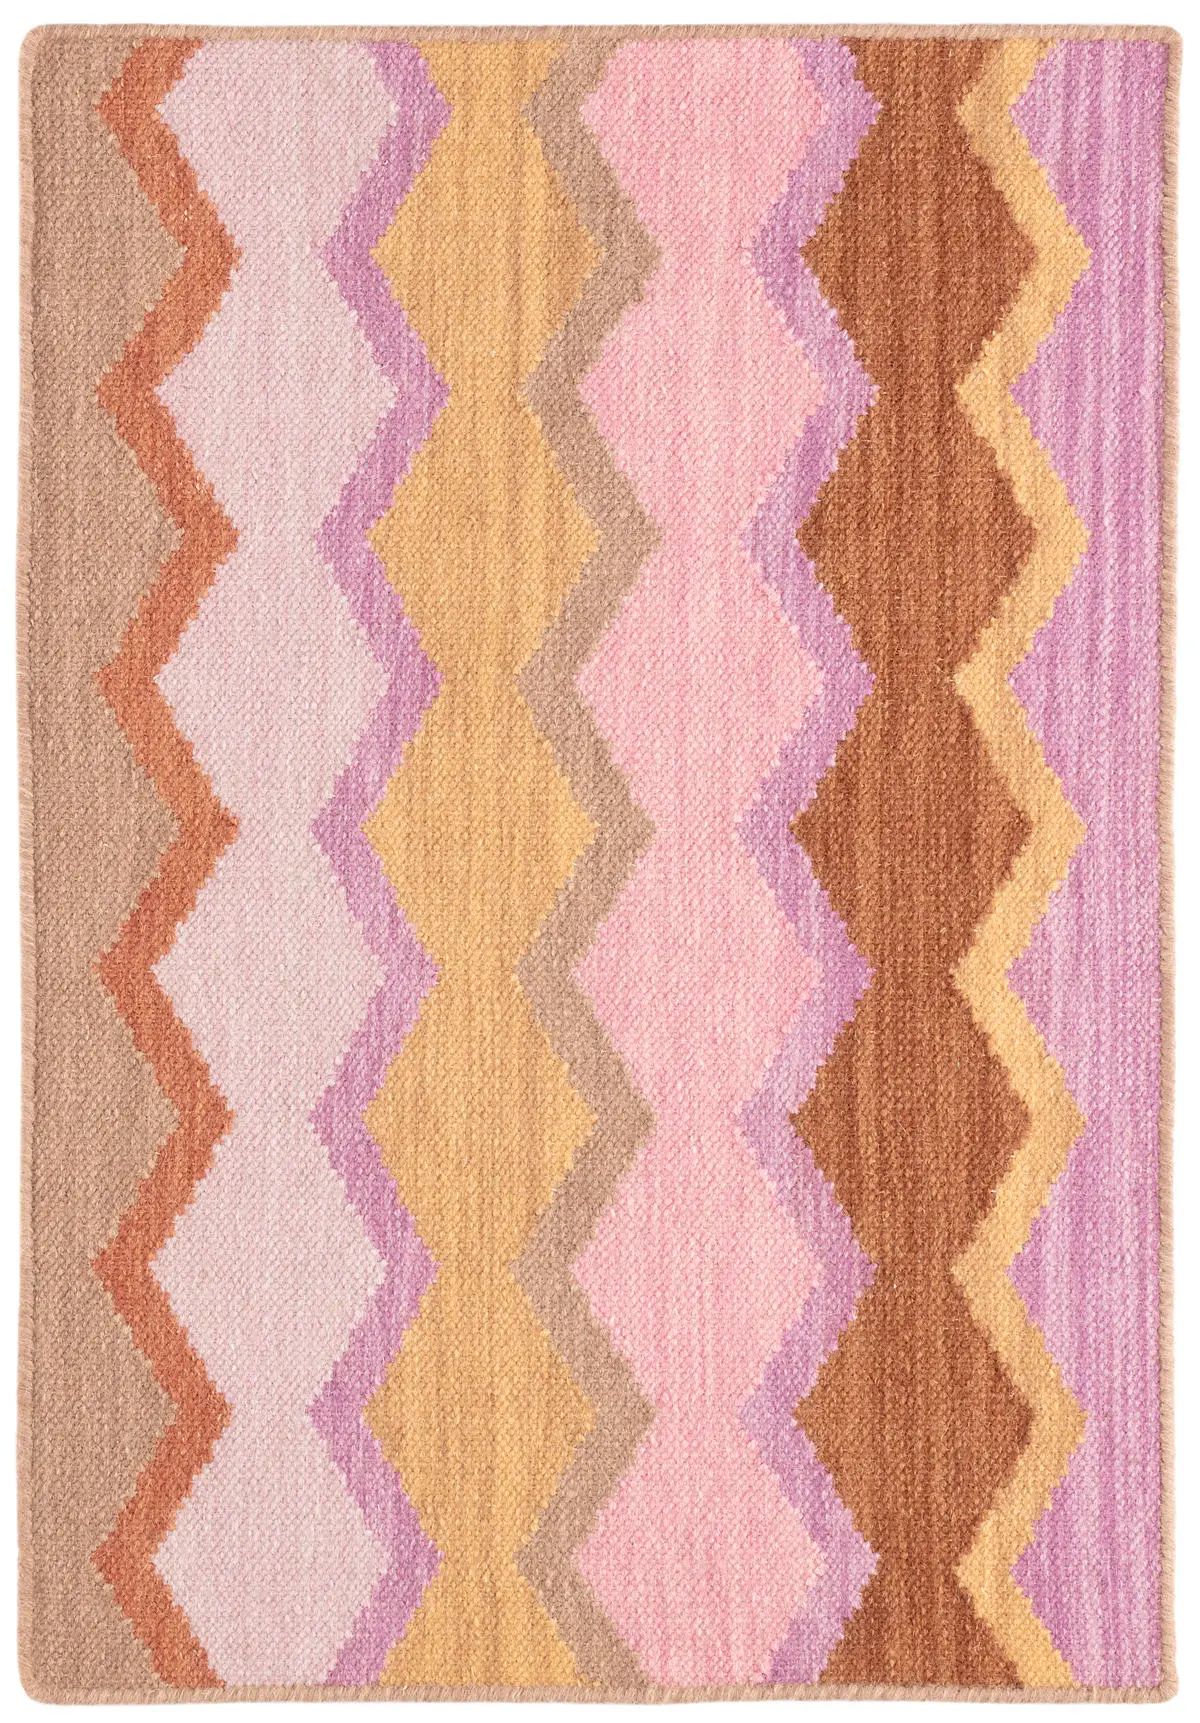 New! Safety Net Spice Woven Wool Rug | Annie Selke